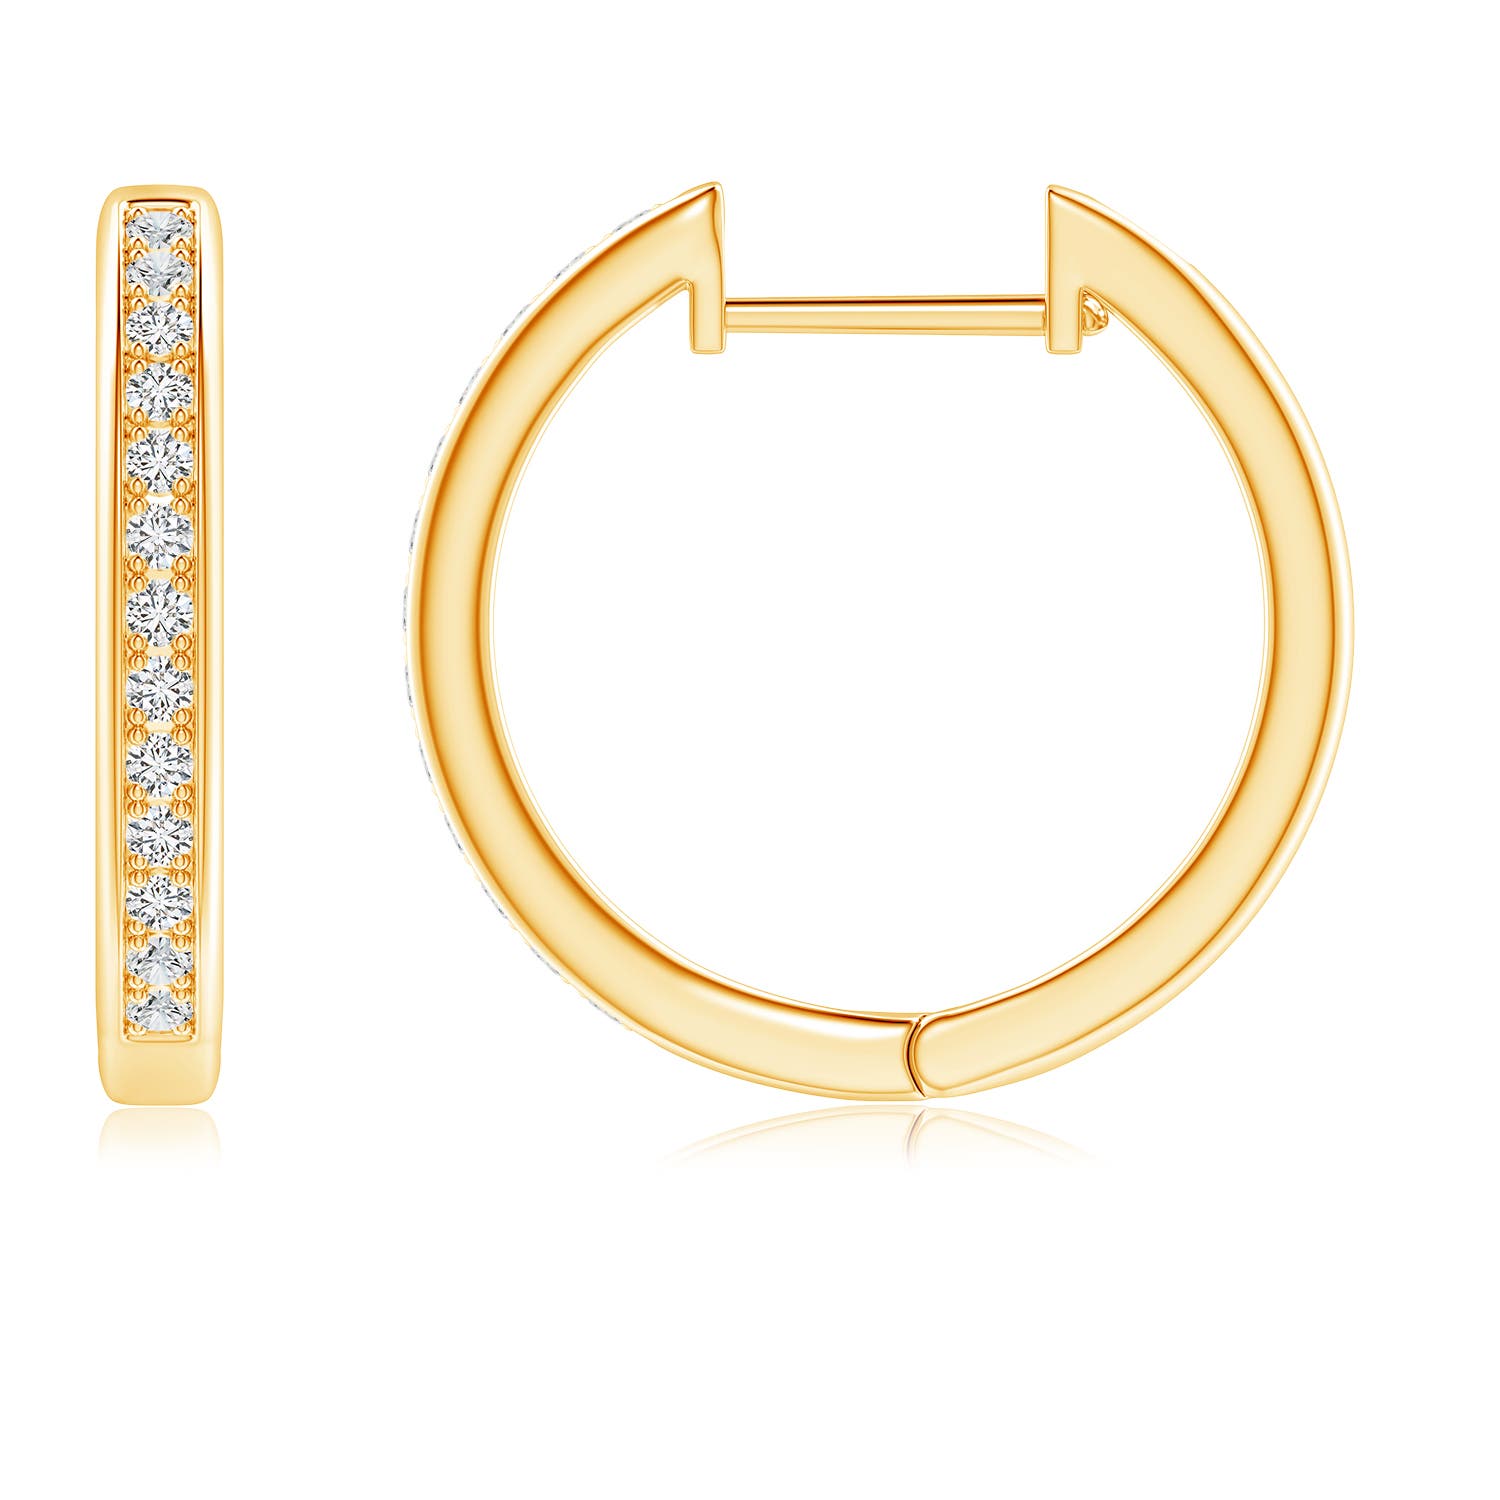 H, SI2 / 0.34 CT / 14 KT Yellow Gold